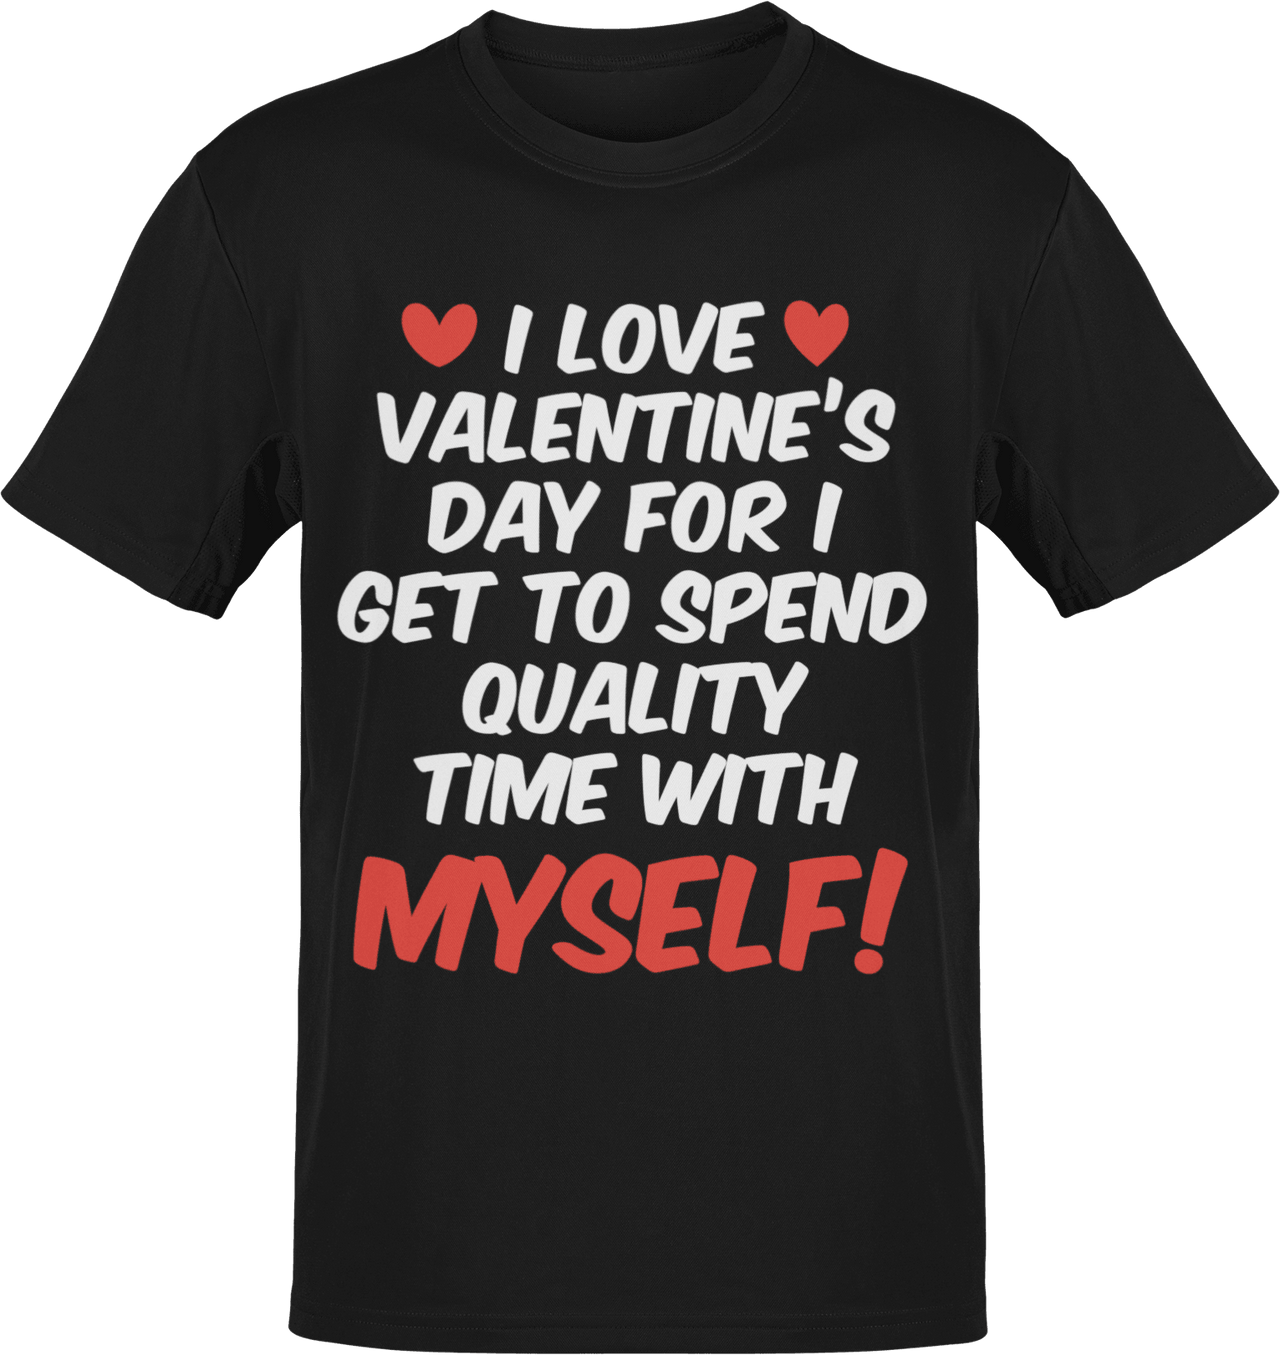 I Love Valentines Day Adult Graphic T-Shirt For Men 8Ball